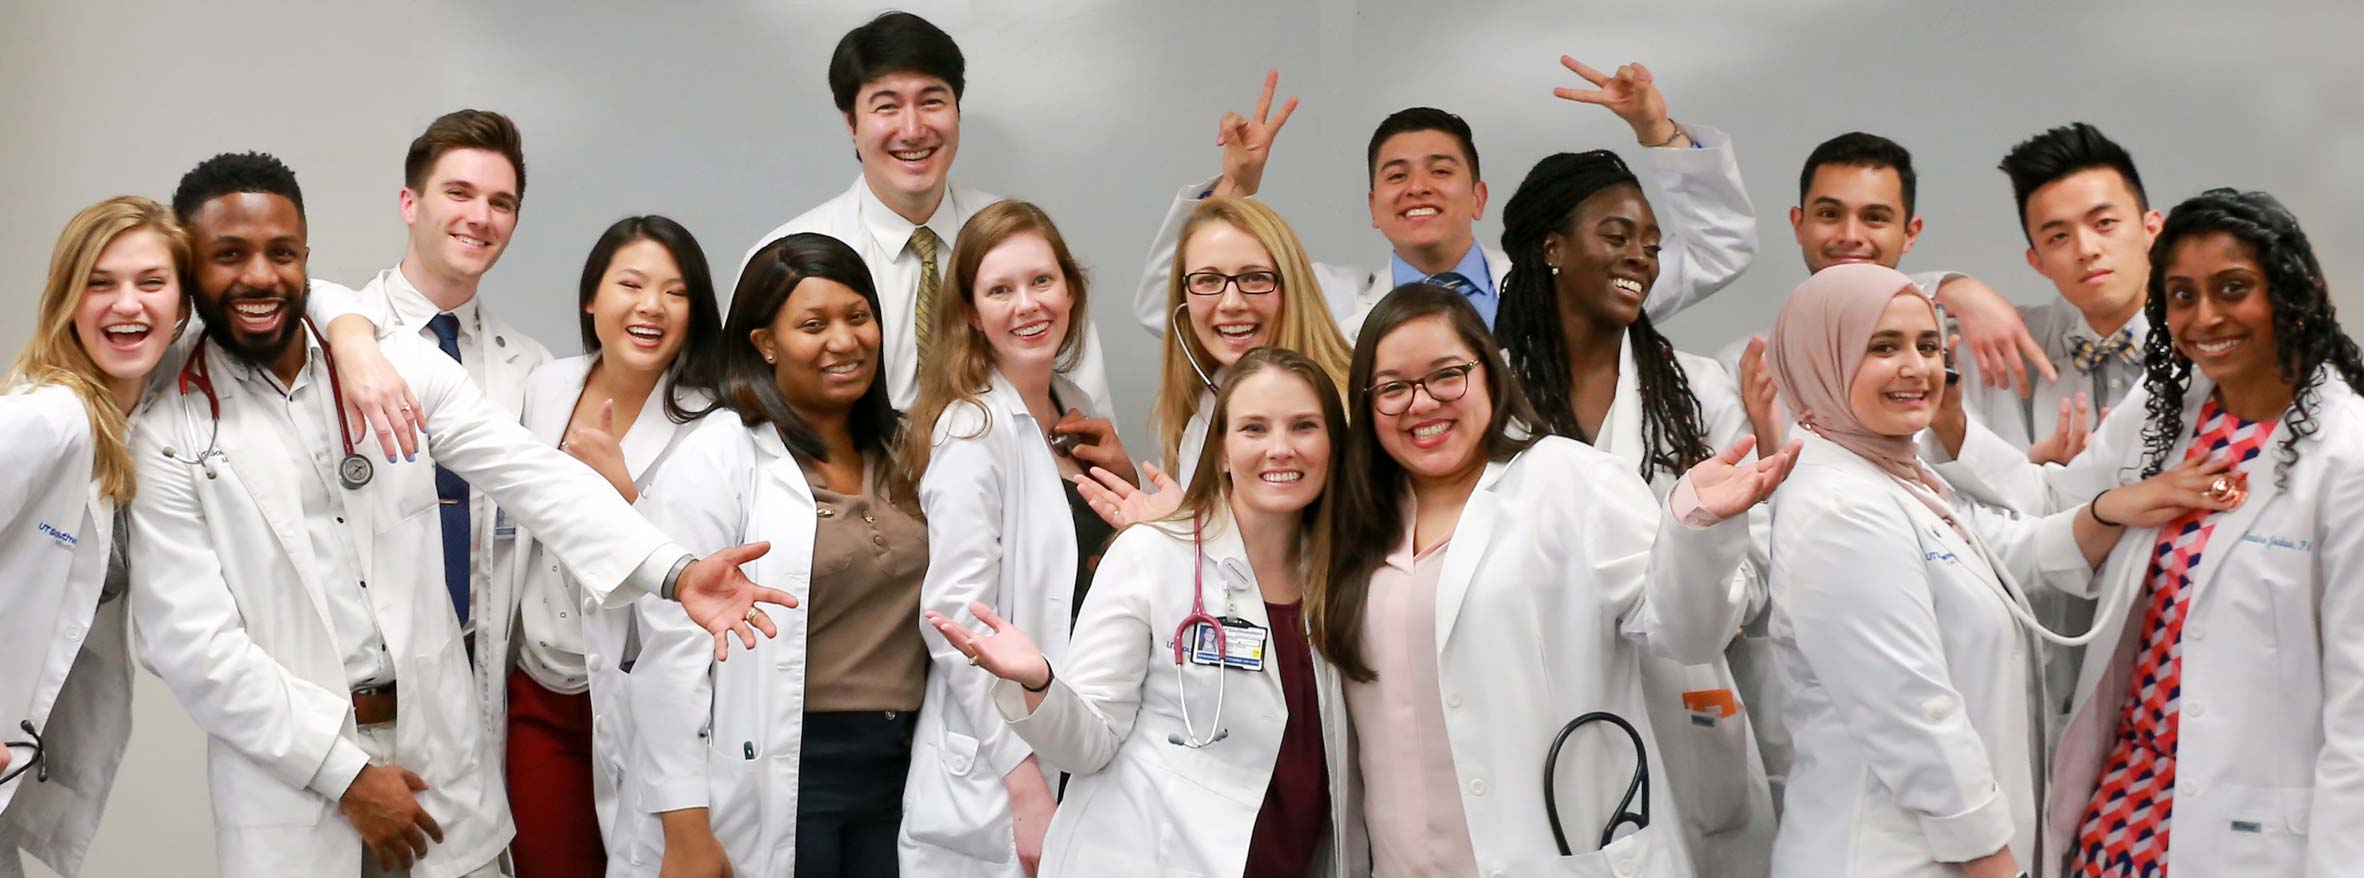 A group of 16 students in white coats